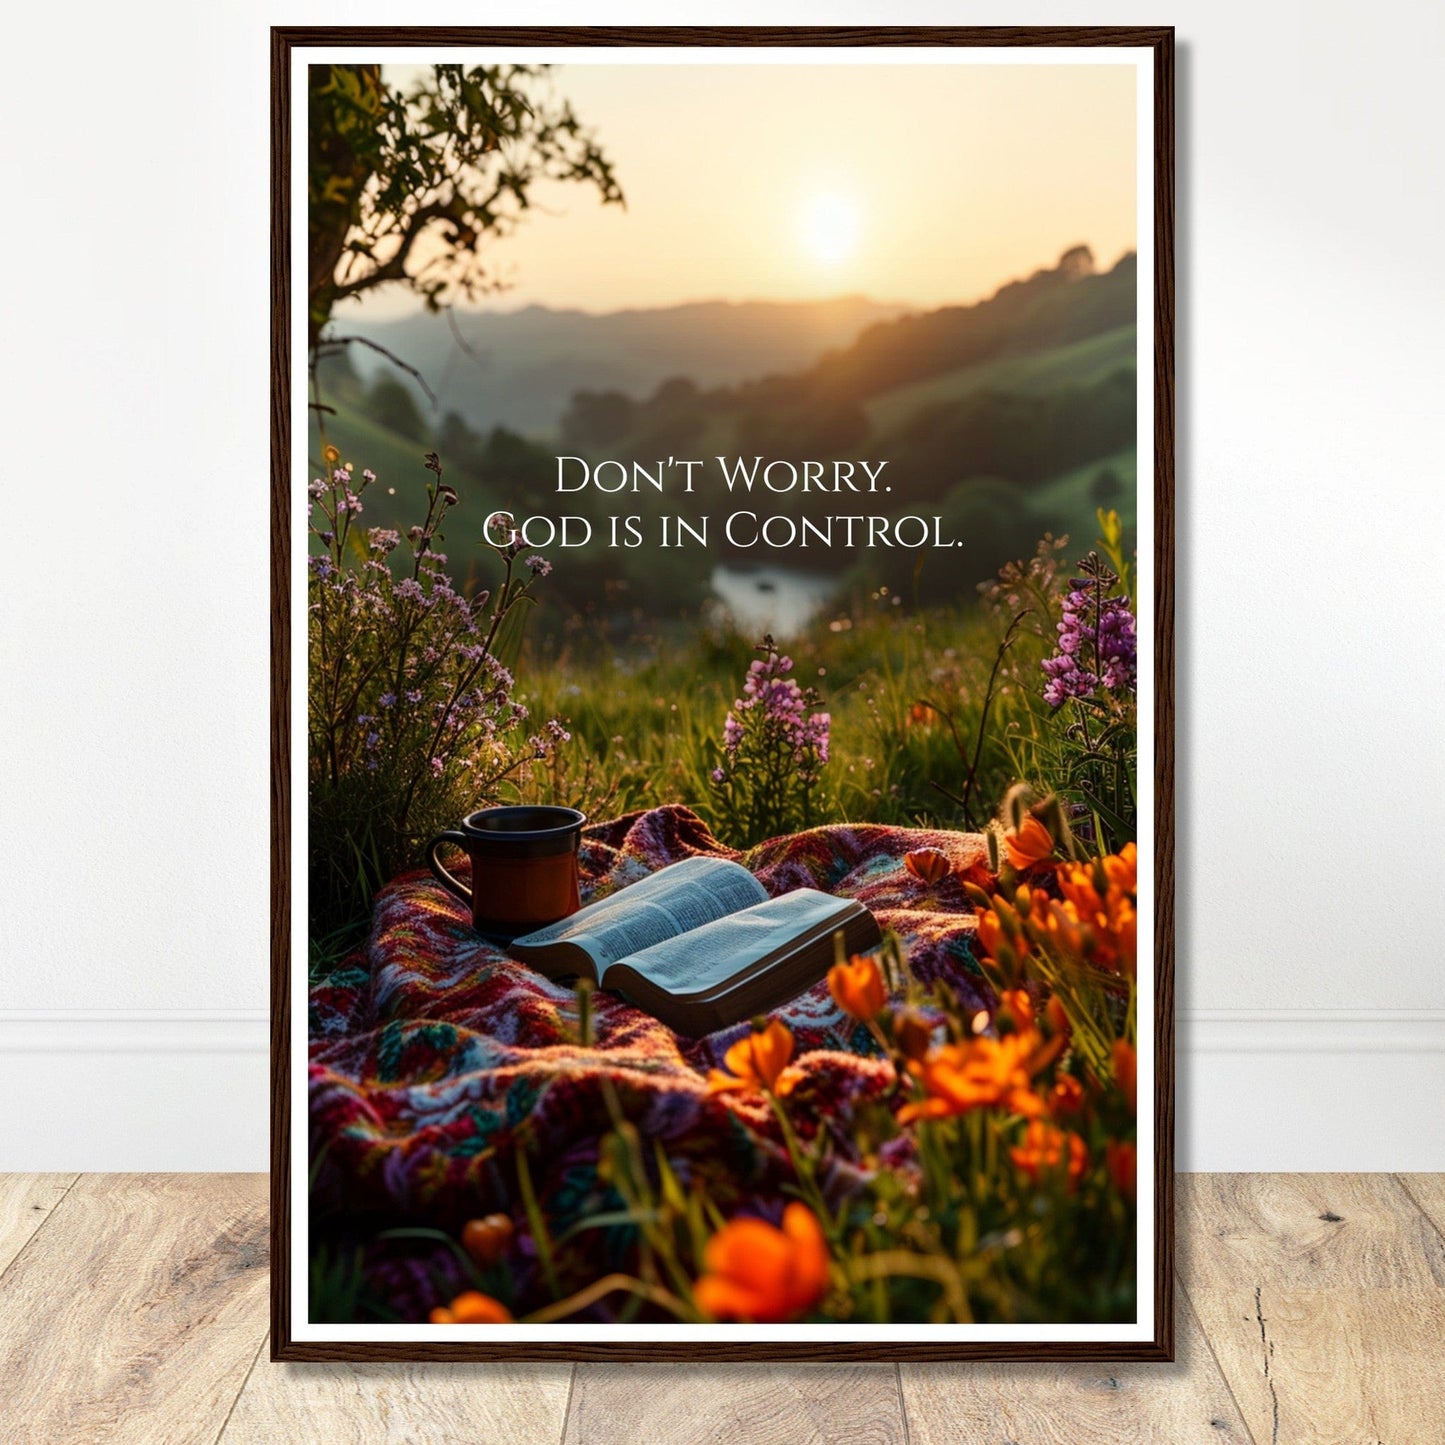 Coffee With My Father Print Material 60x90 cm / 24x36″ / Dark wood frame Premium Matte Paper Wooden Framed Poster